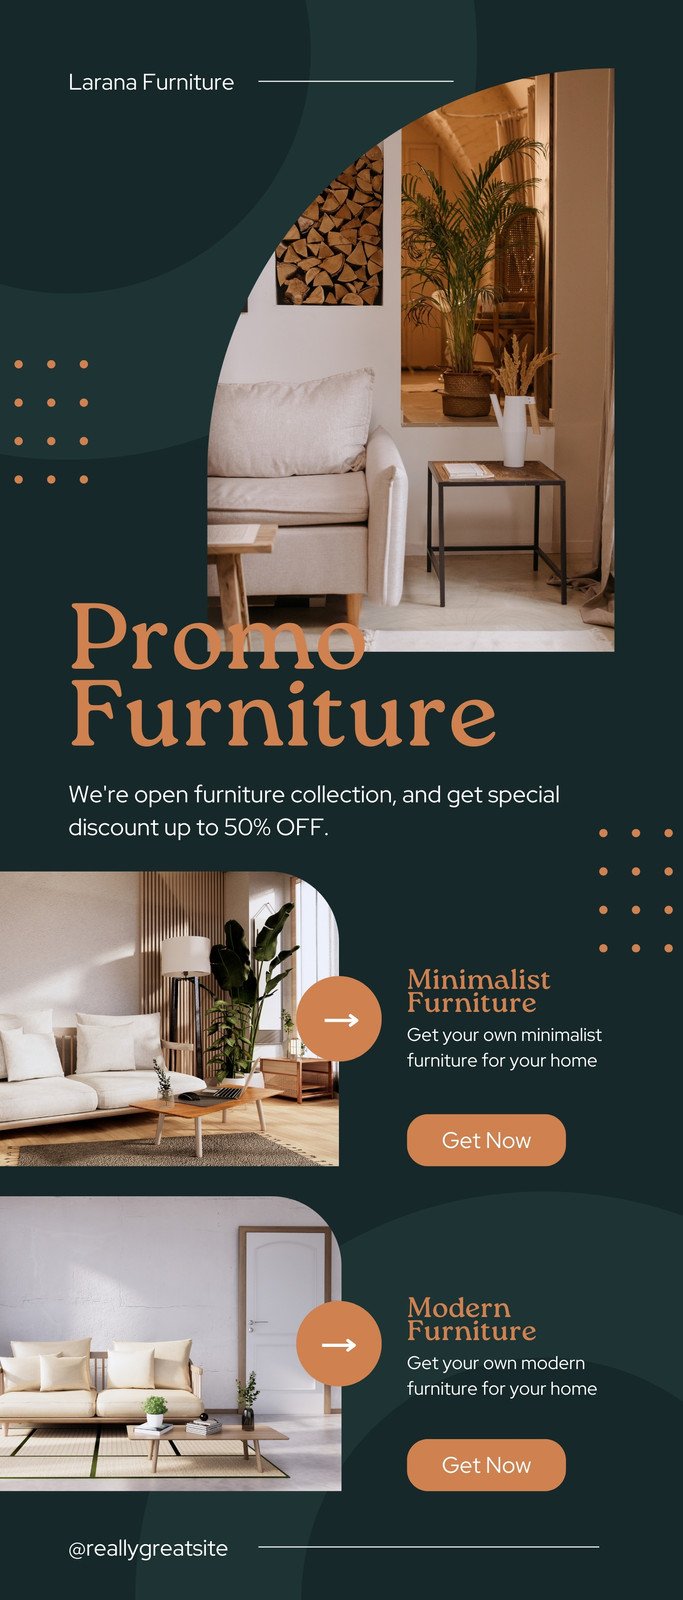 Furniture banner Images - Search Images on Everypixel